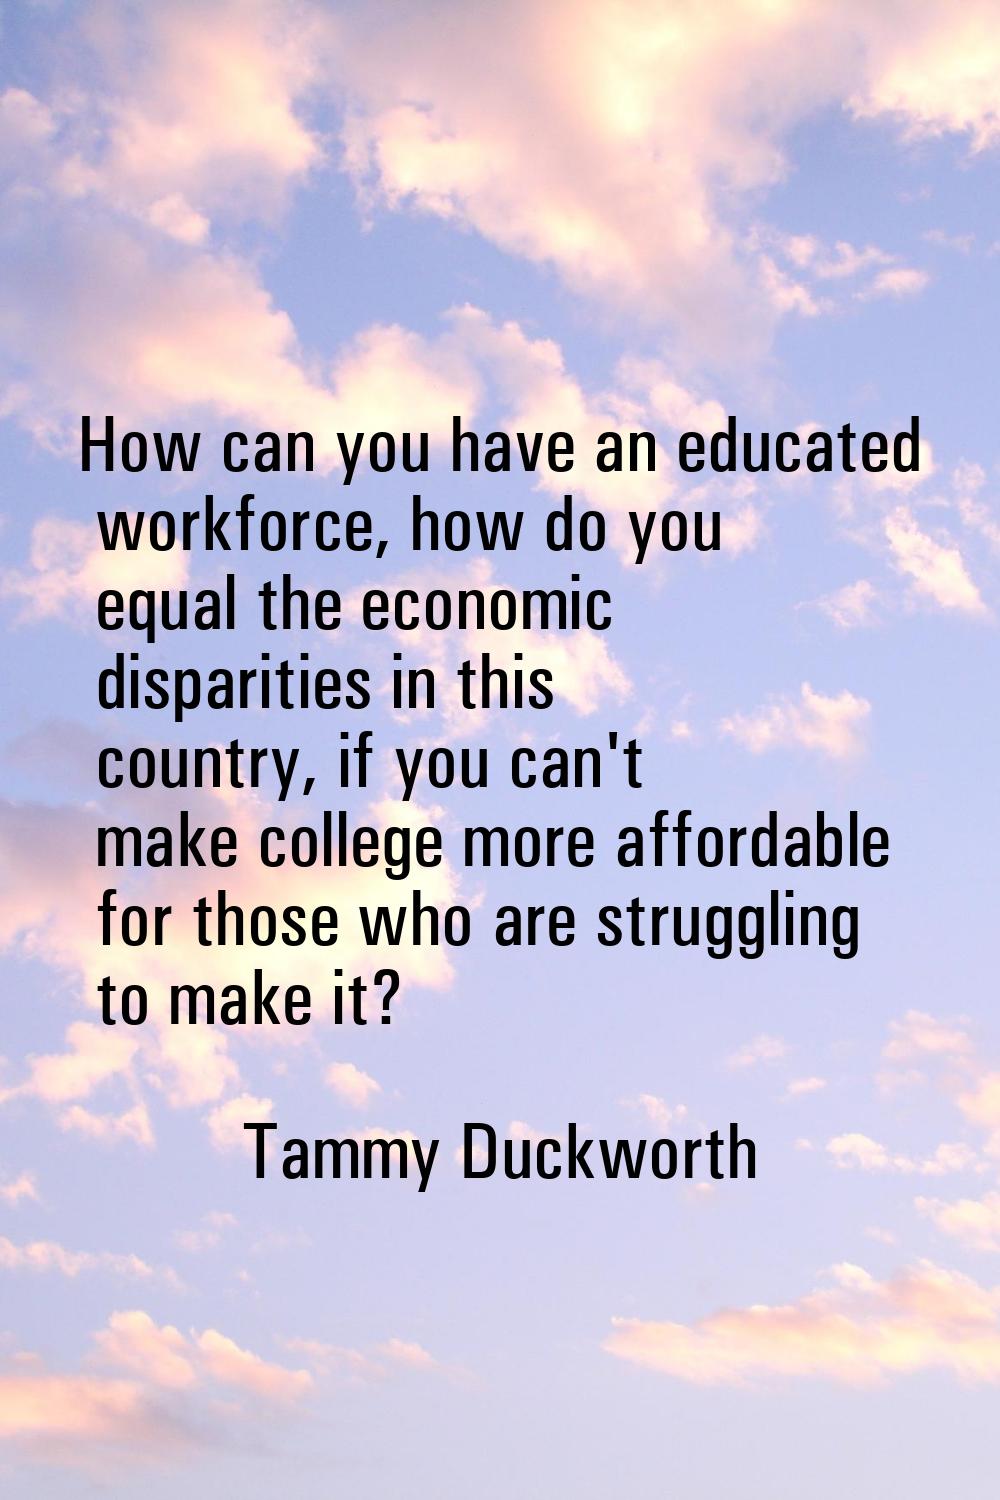 How can you have an educated workforce, how do you equal the economic disparities in this country, 